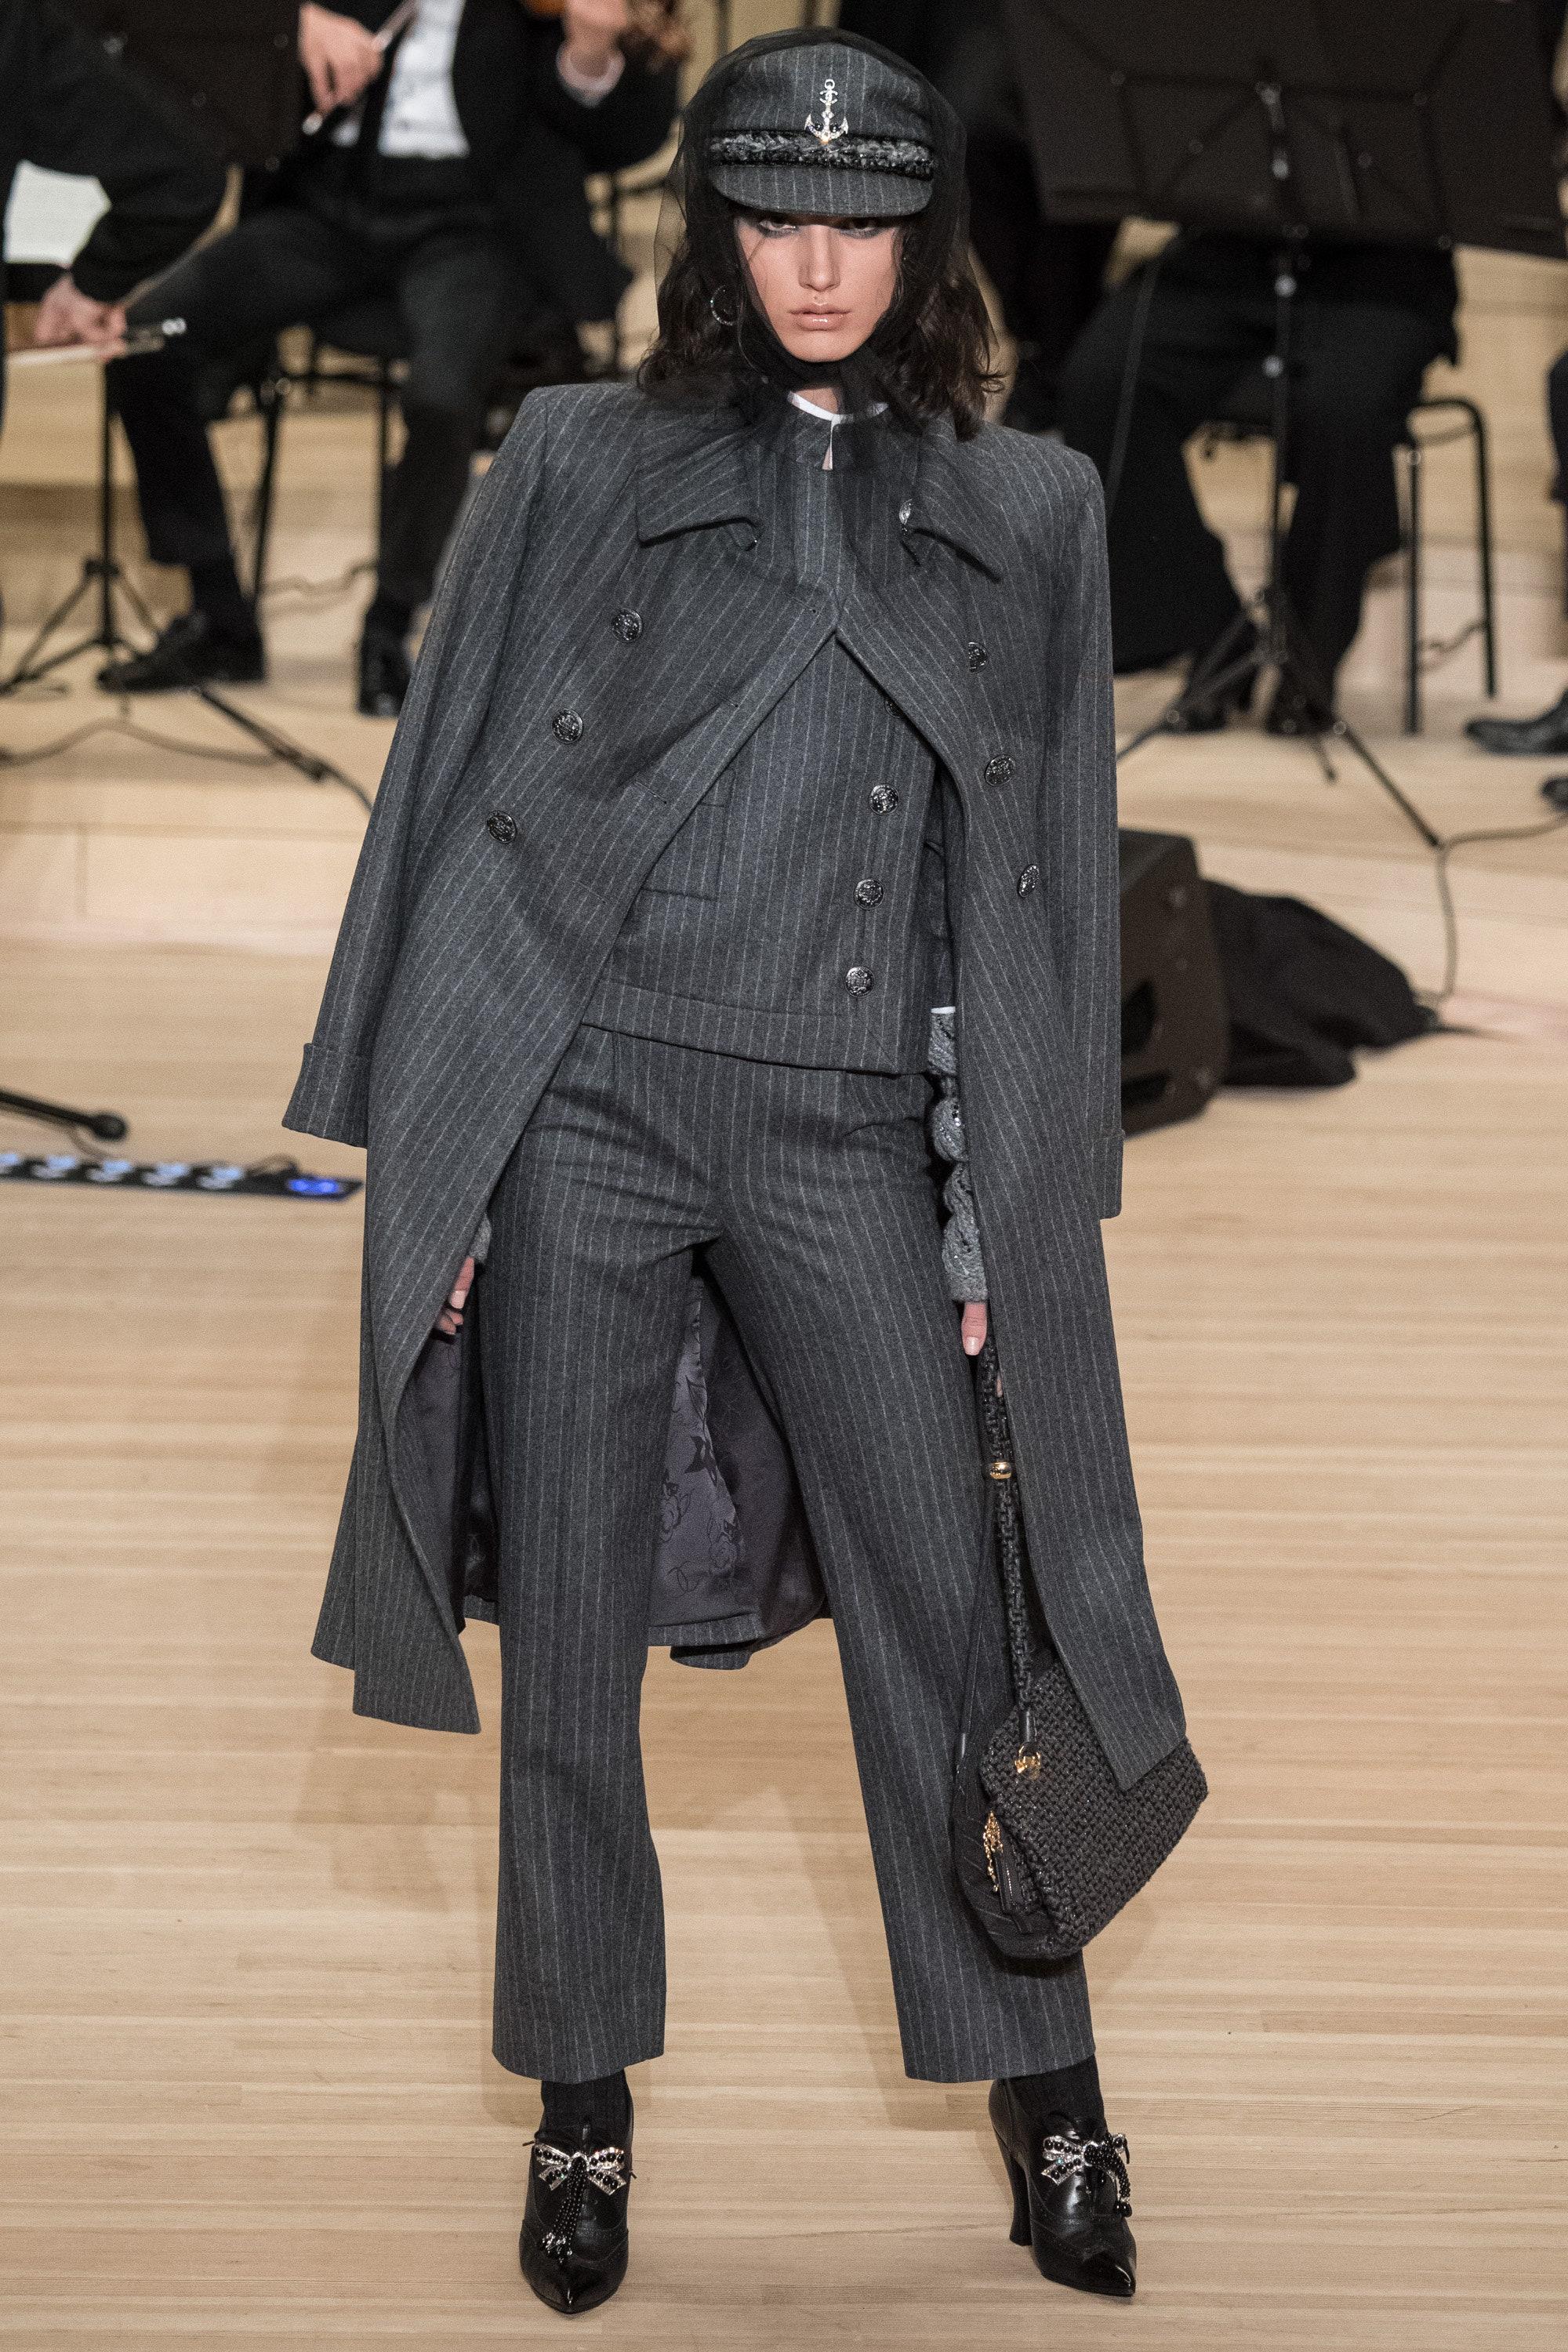 New grey striped jacket from Runway of 2018 Pre-Fall Collection: Paris / HAMBURG Metiers d'Art, 18A
- CC logo buttons at front and cuffs
- full silk lining with camellias
- comes with paper Chanel pouch with spare buttons
- detachable white